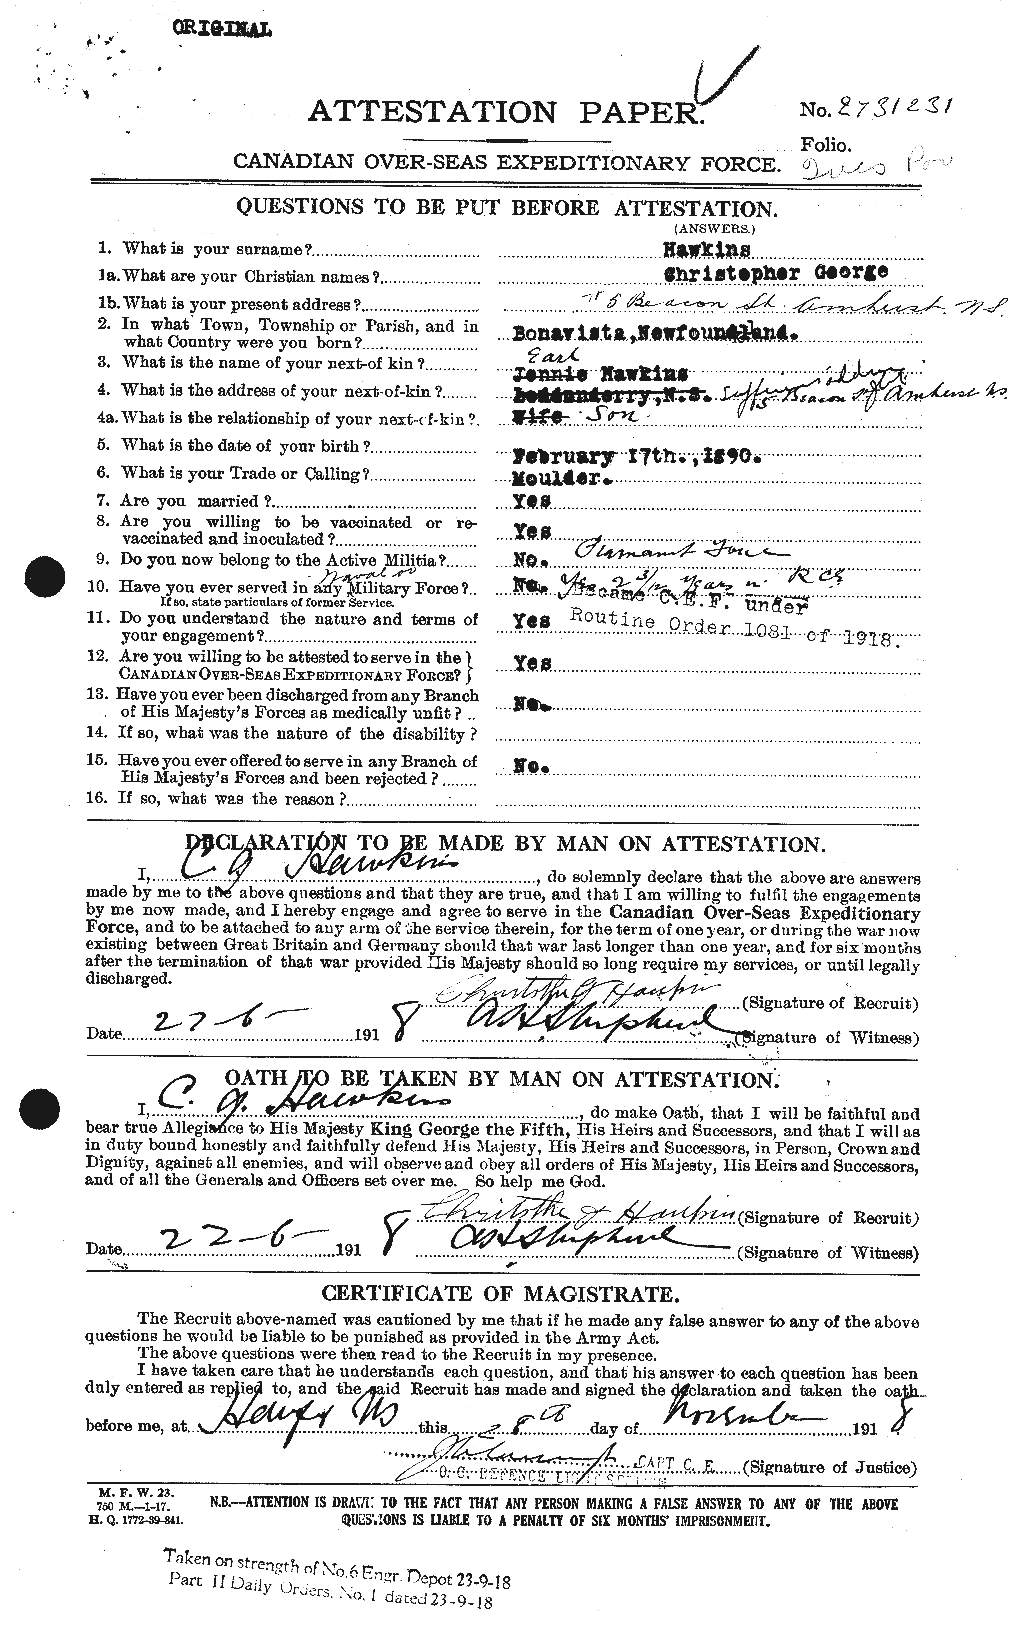 Personnel Records of the First World War - CEF 384660a